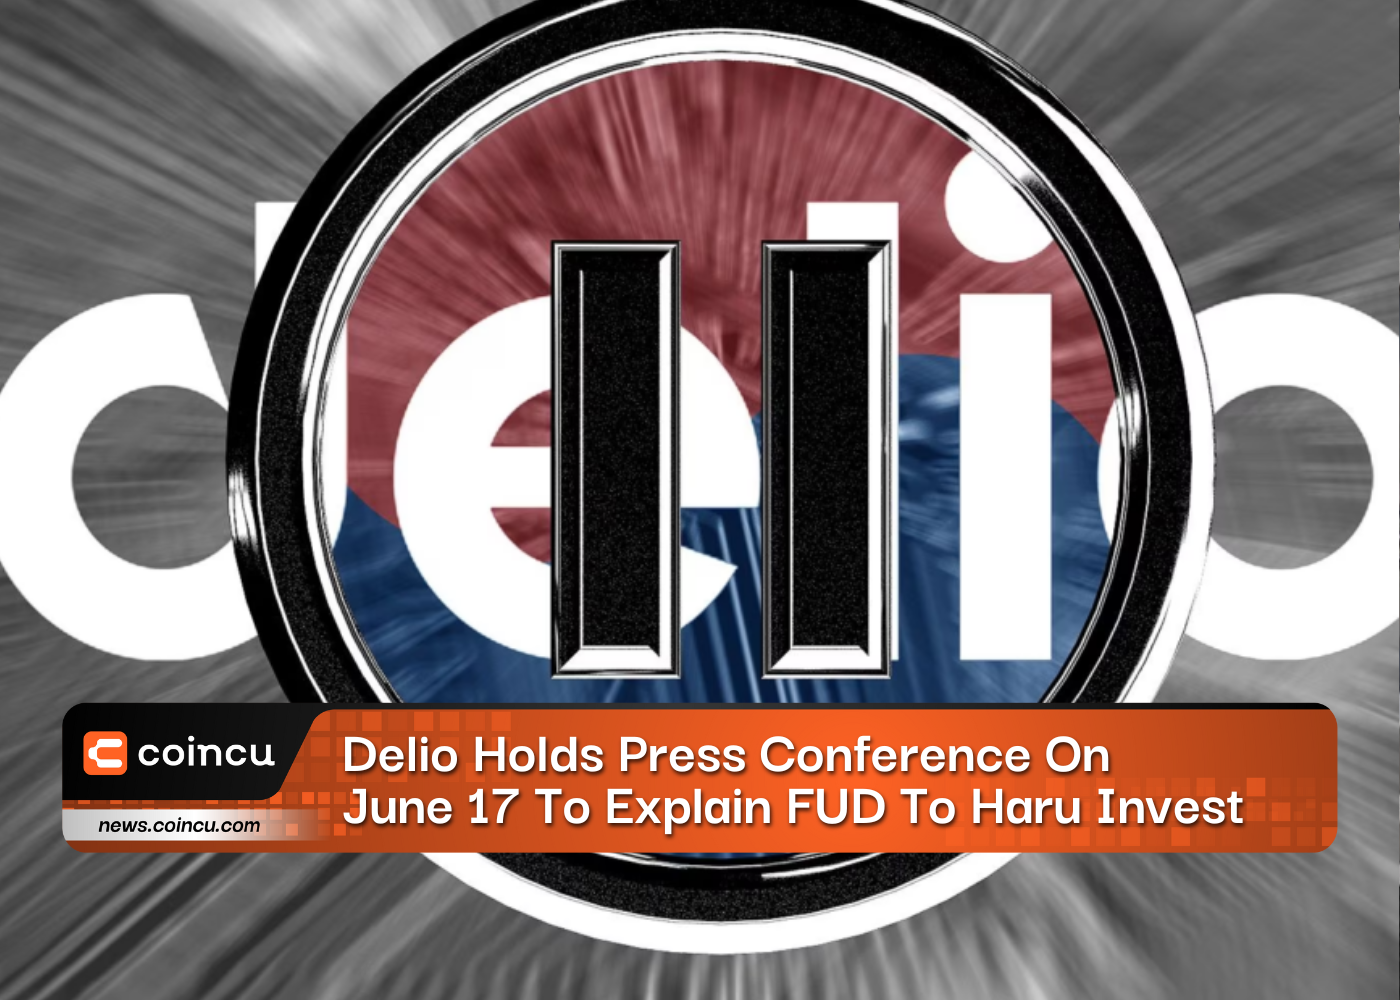 Delio Holds Press Conference On June 17 To Explain FUD To Haru Invest